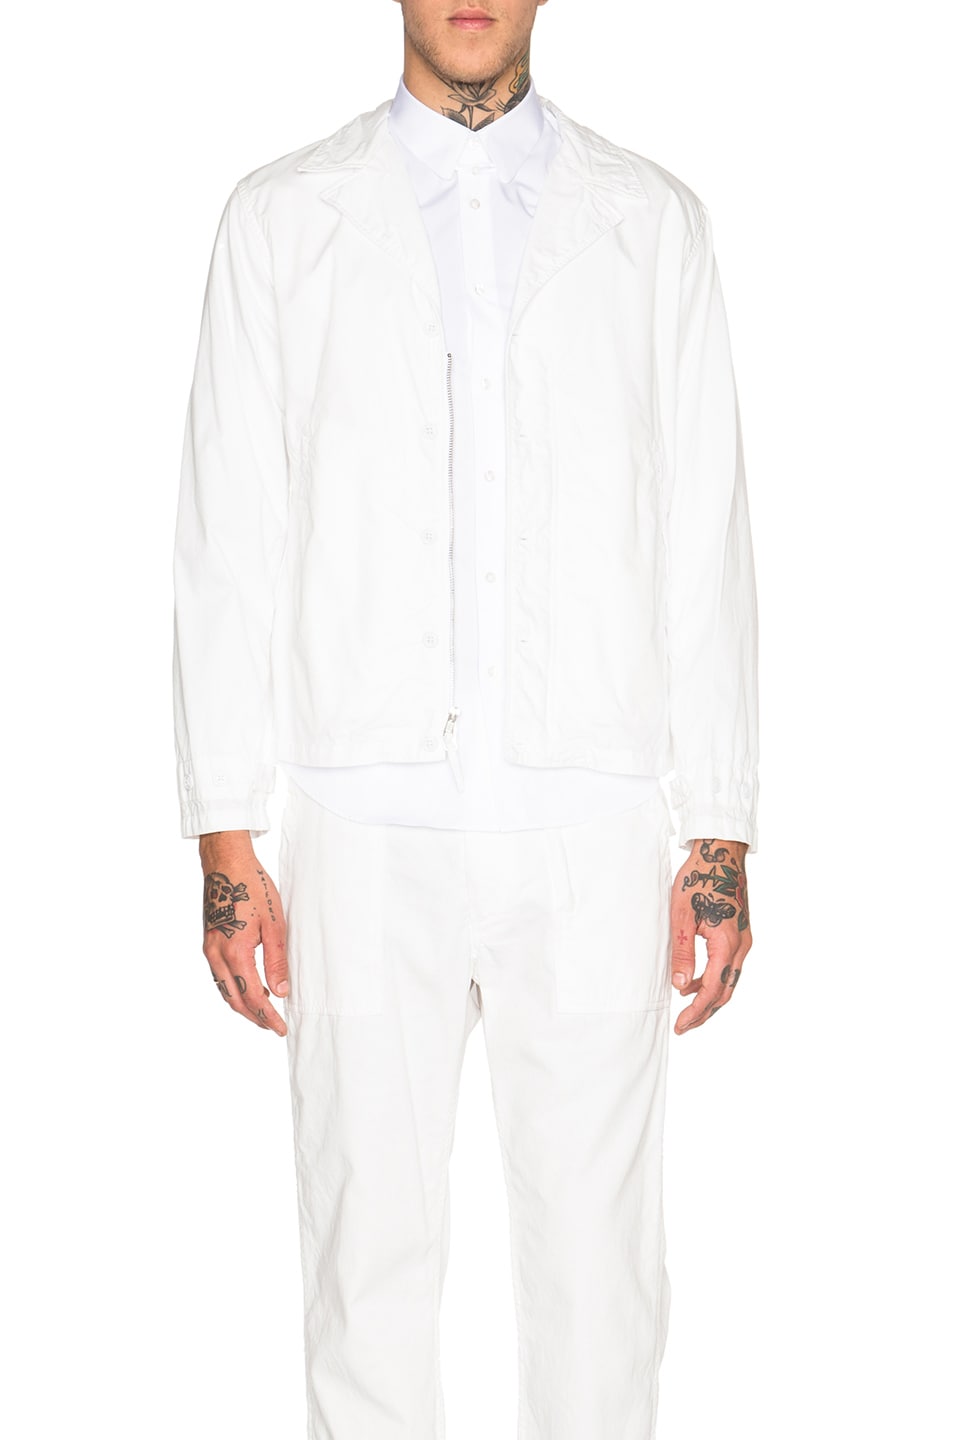 Image 1 of Engineered Garments M 41 Jacket in White Washer Twill